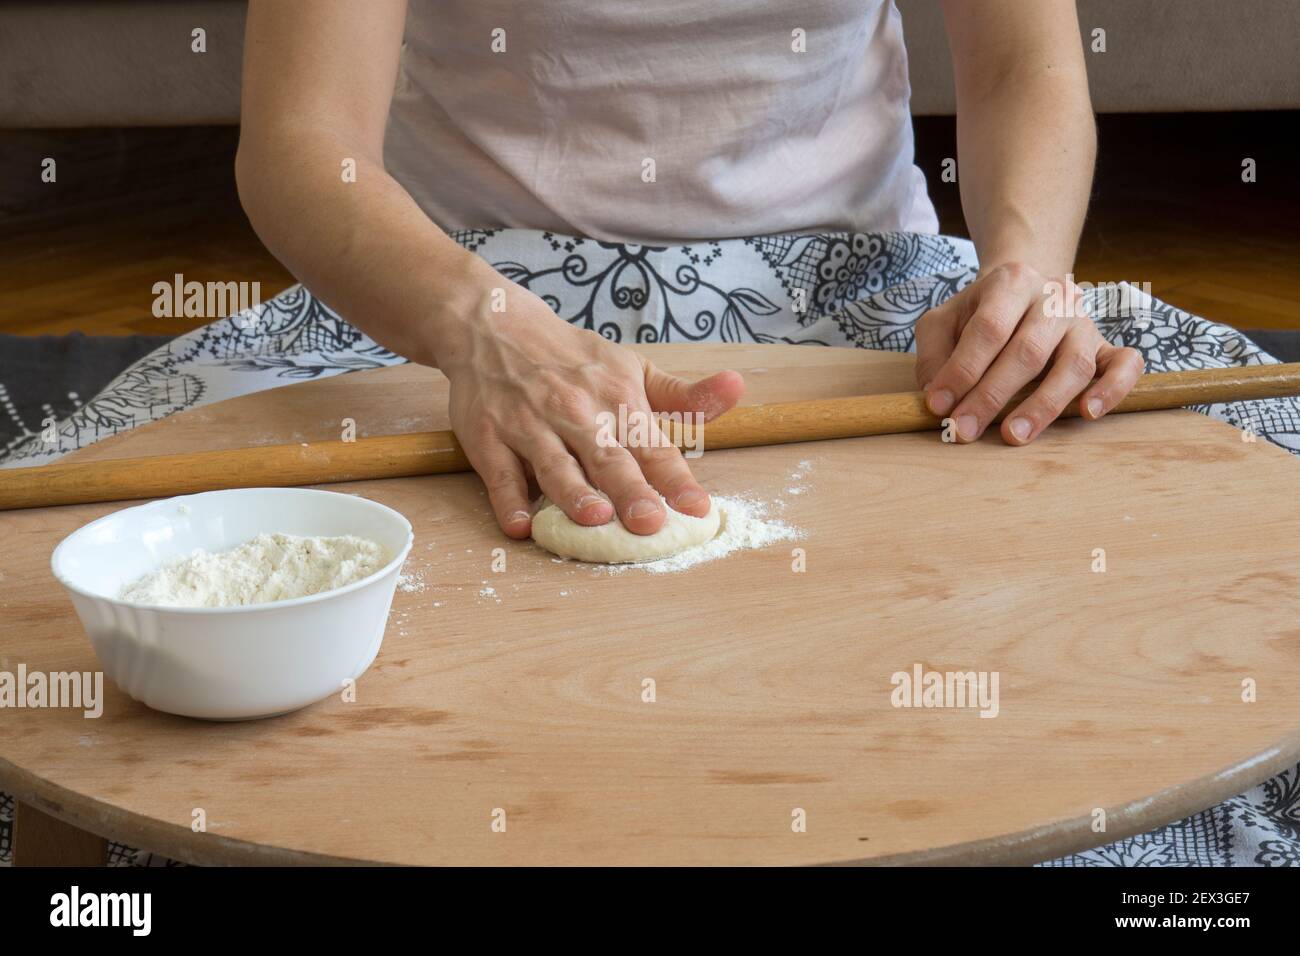 Homemade lahmacun preparation from start to finish. Dough rolls on the floor table Stock Photo